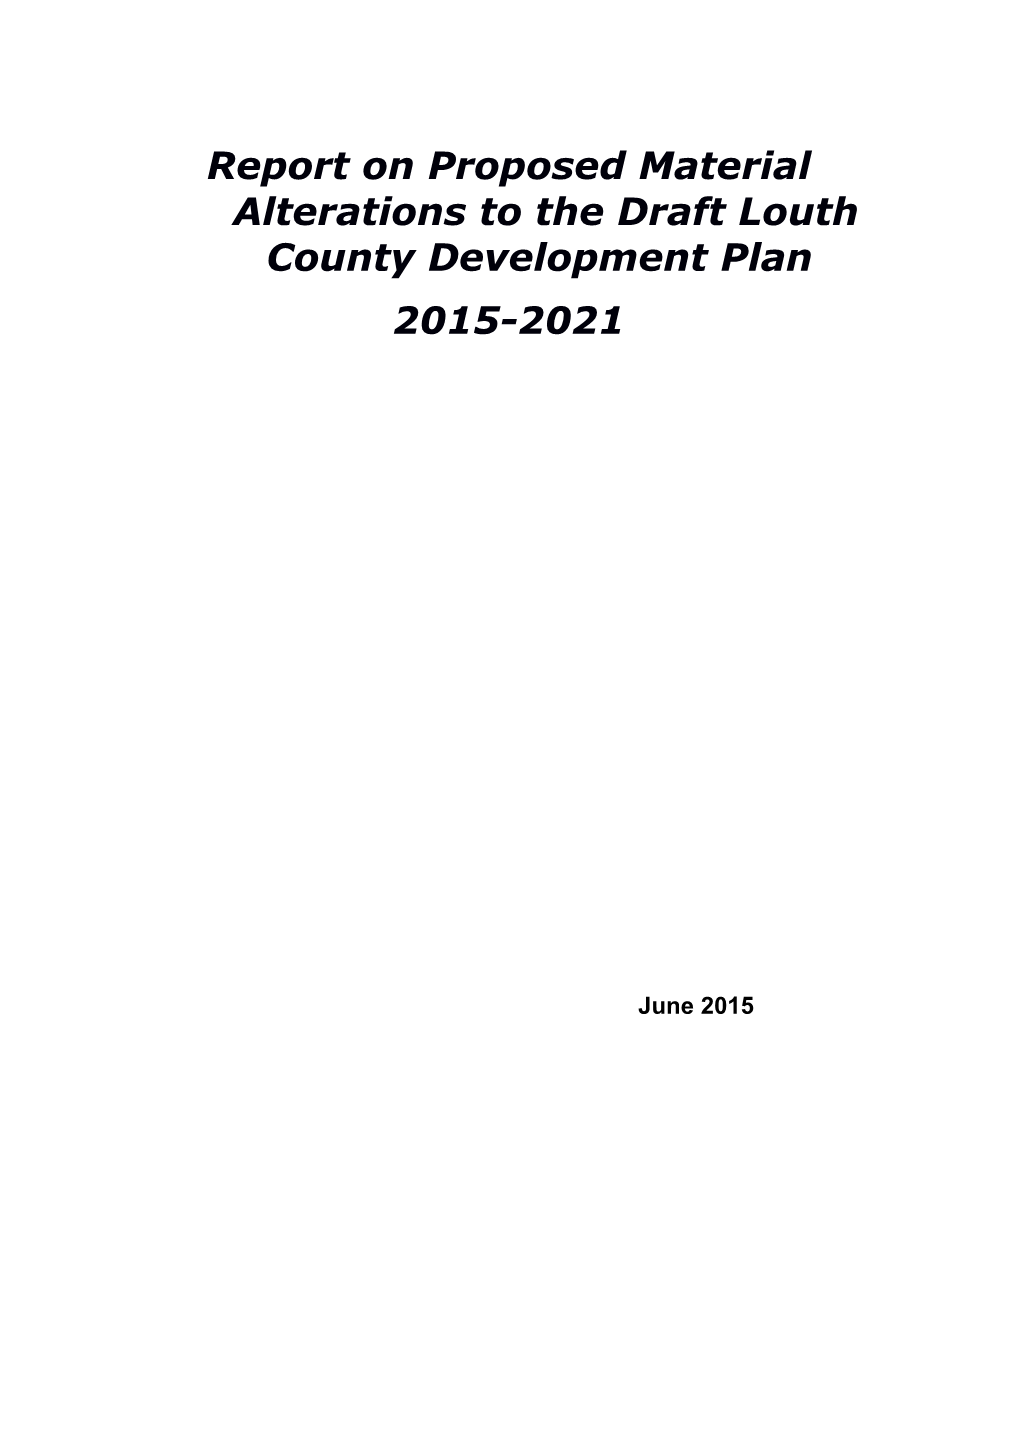 Report on Proposed Material Alterations to the Draft Louth County Development Plan